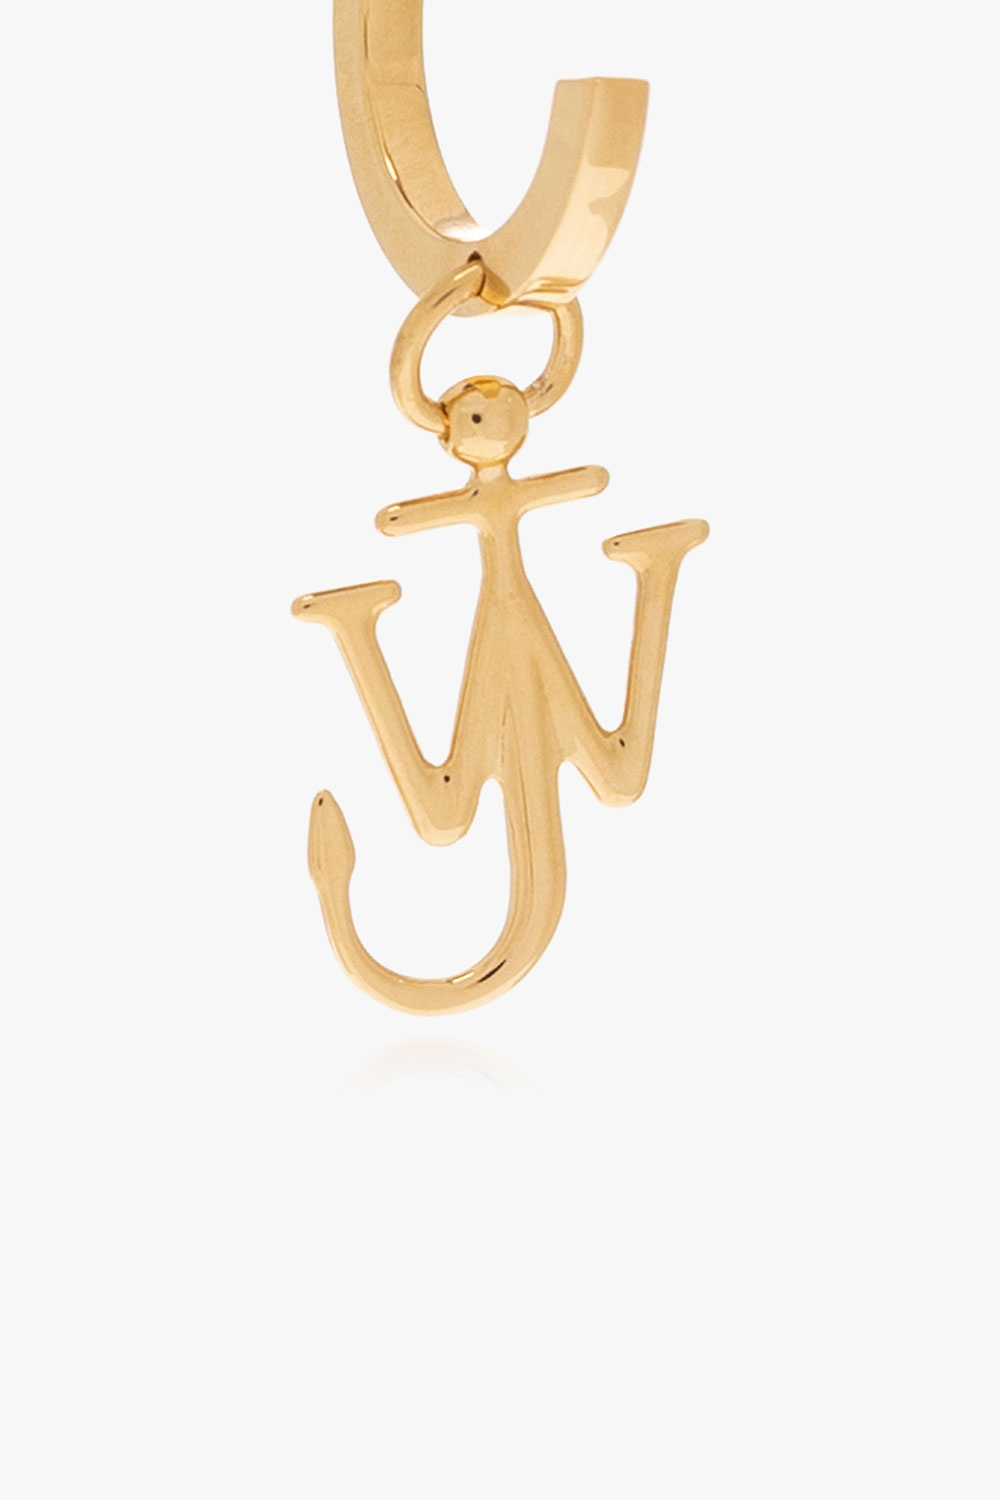 JW Anderson Download the latest version of the app